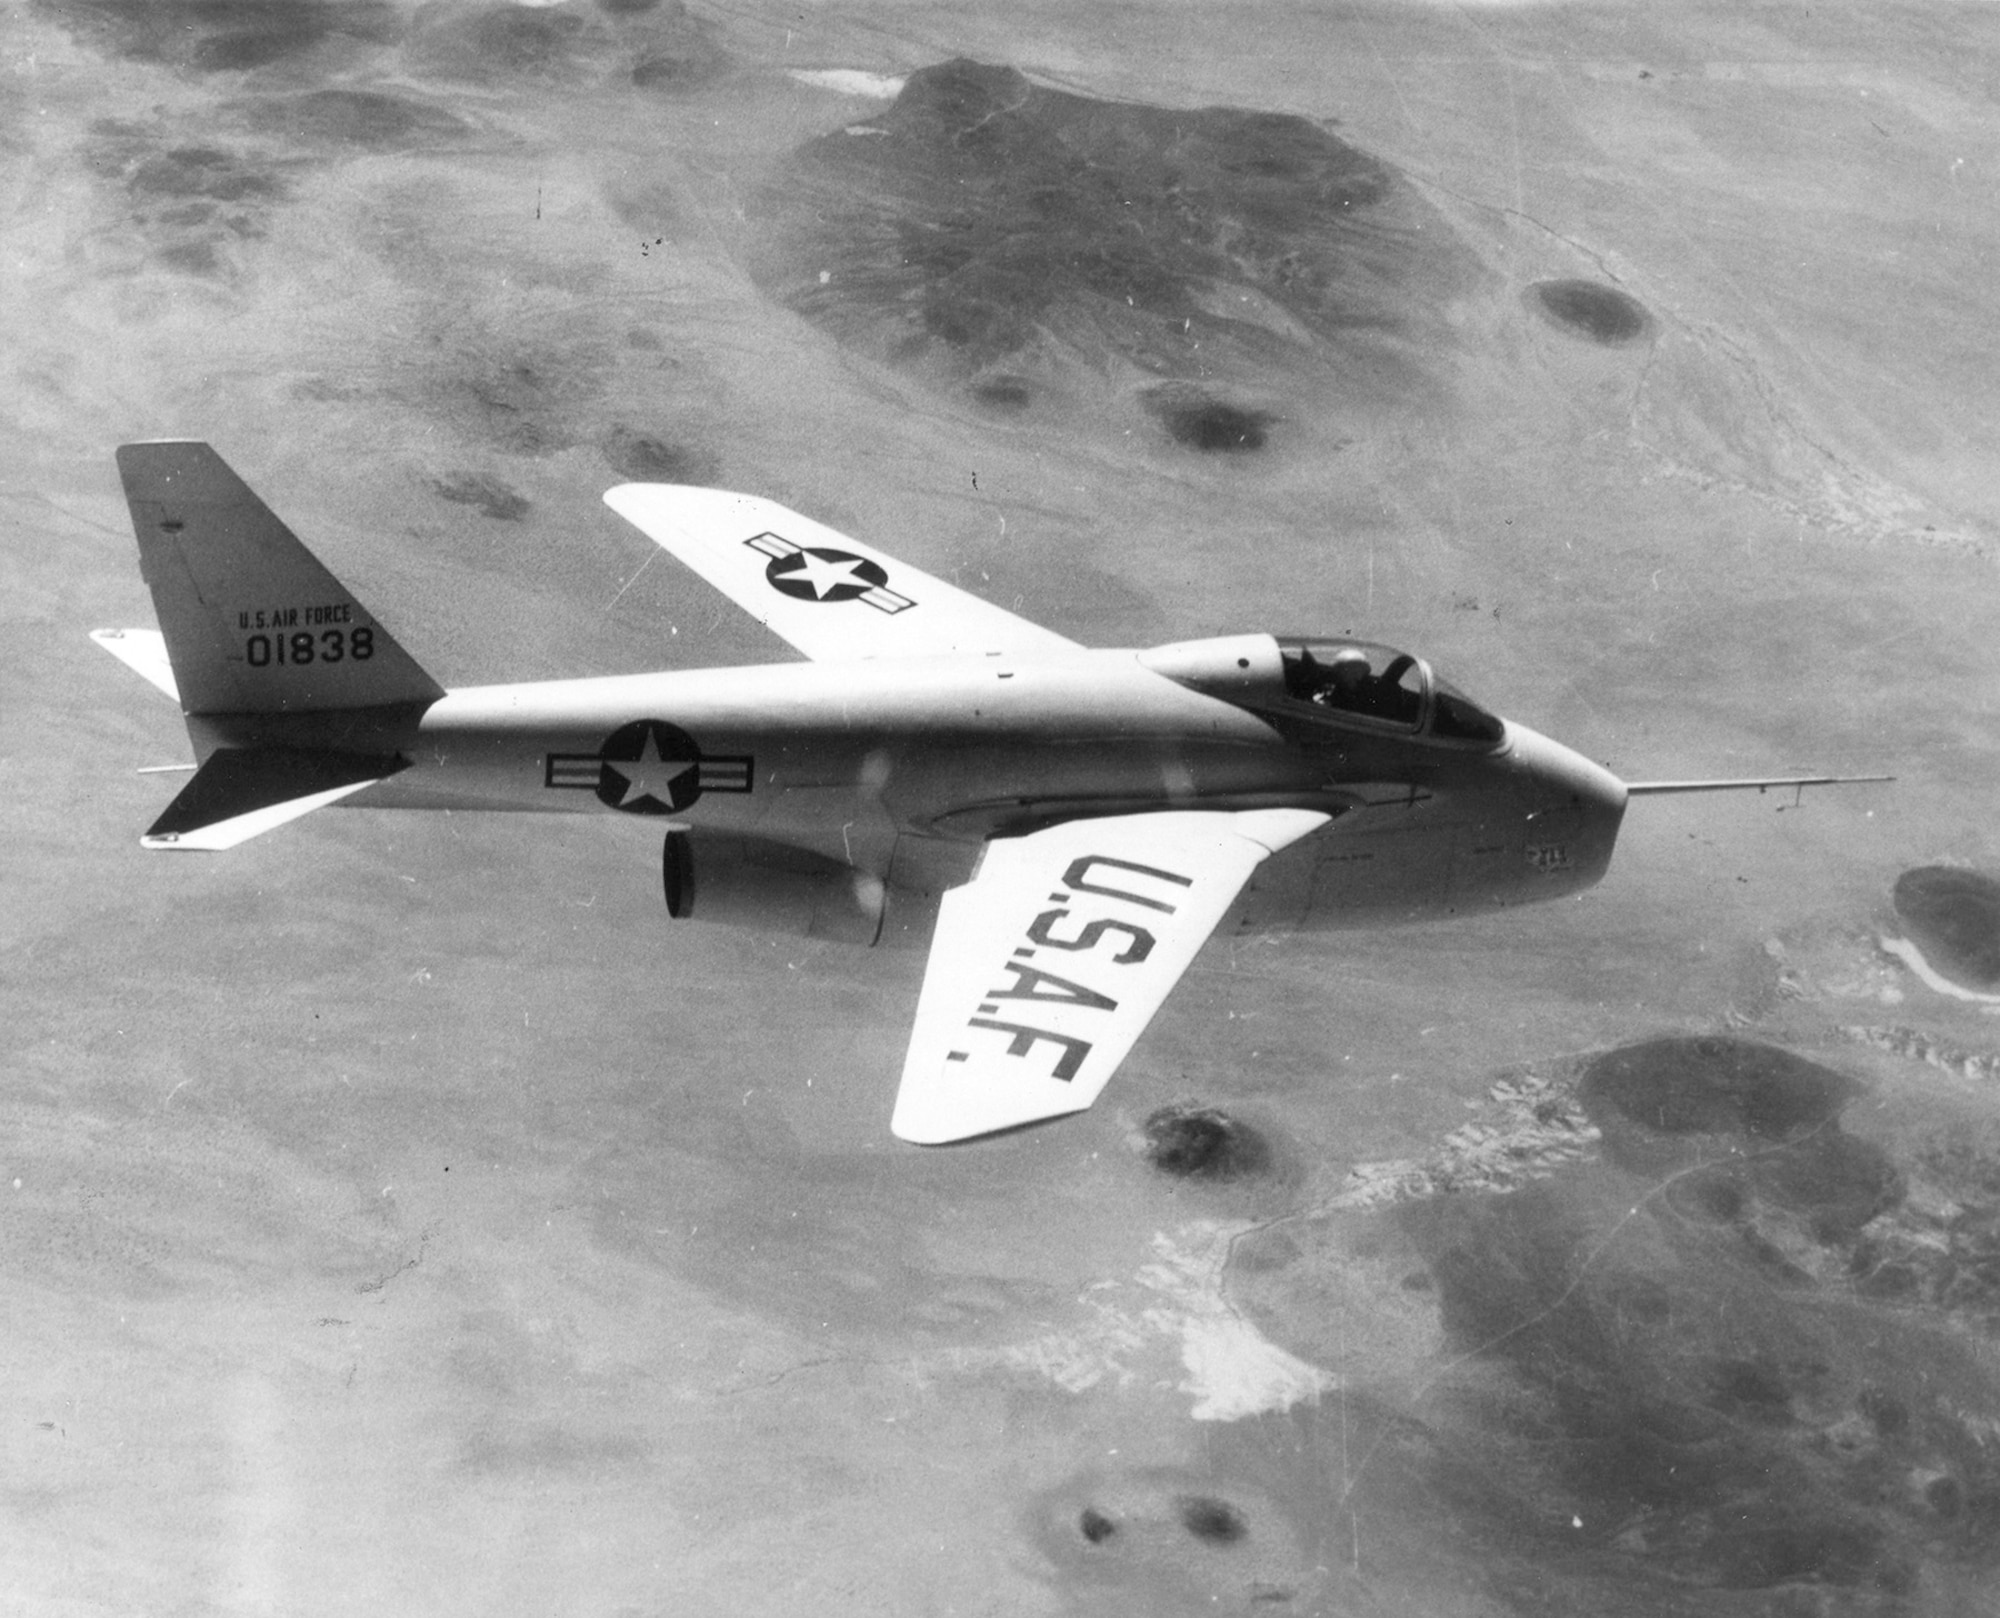 The museum’s X-5 flying with its wings swept fully forward, which allowed it to take off and land in a shorter distance, land at a lower speed, and climb faster. With the wings swept back, it could fly faster. (U.S. Air Force photo)